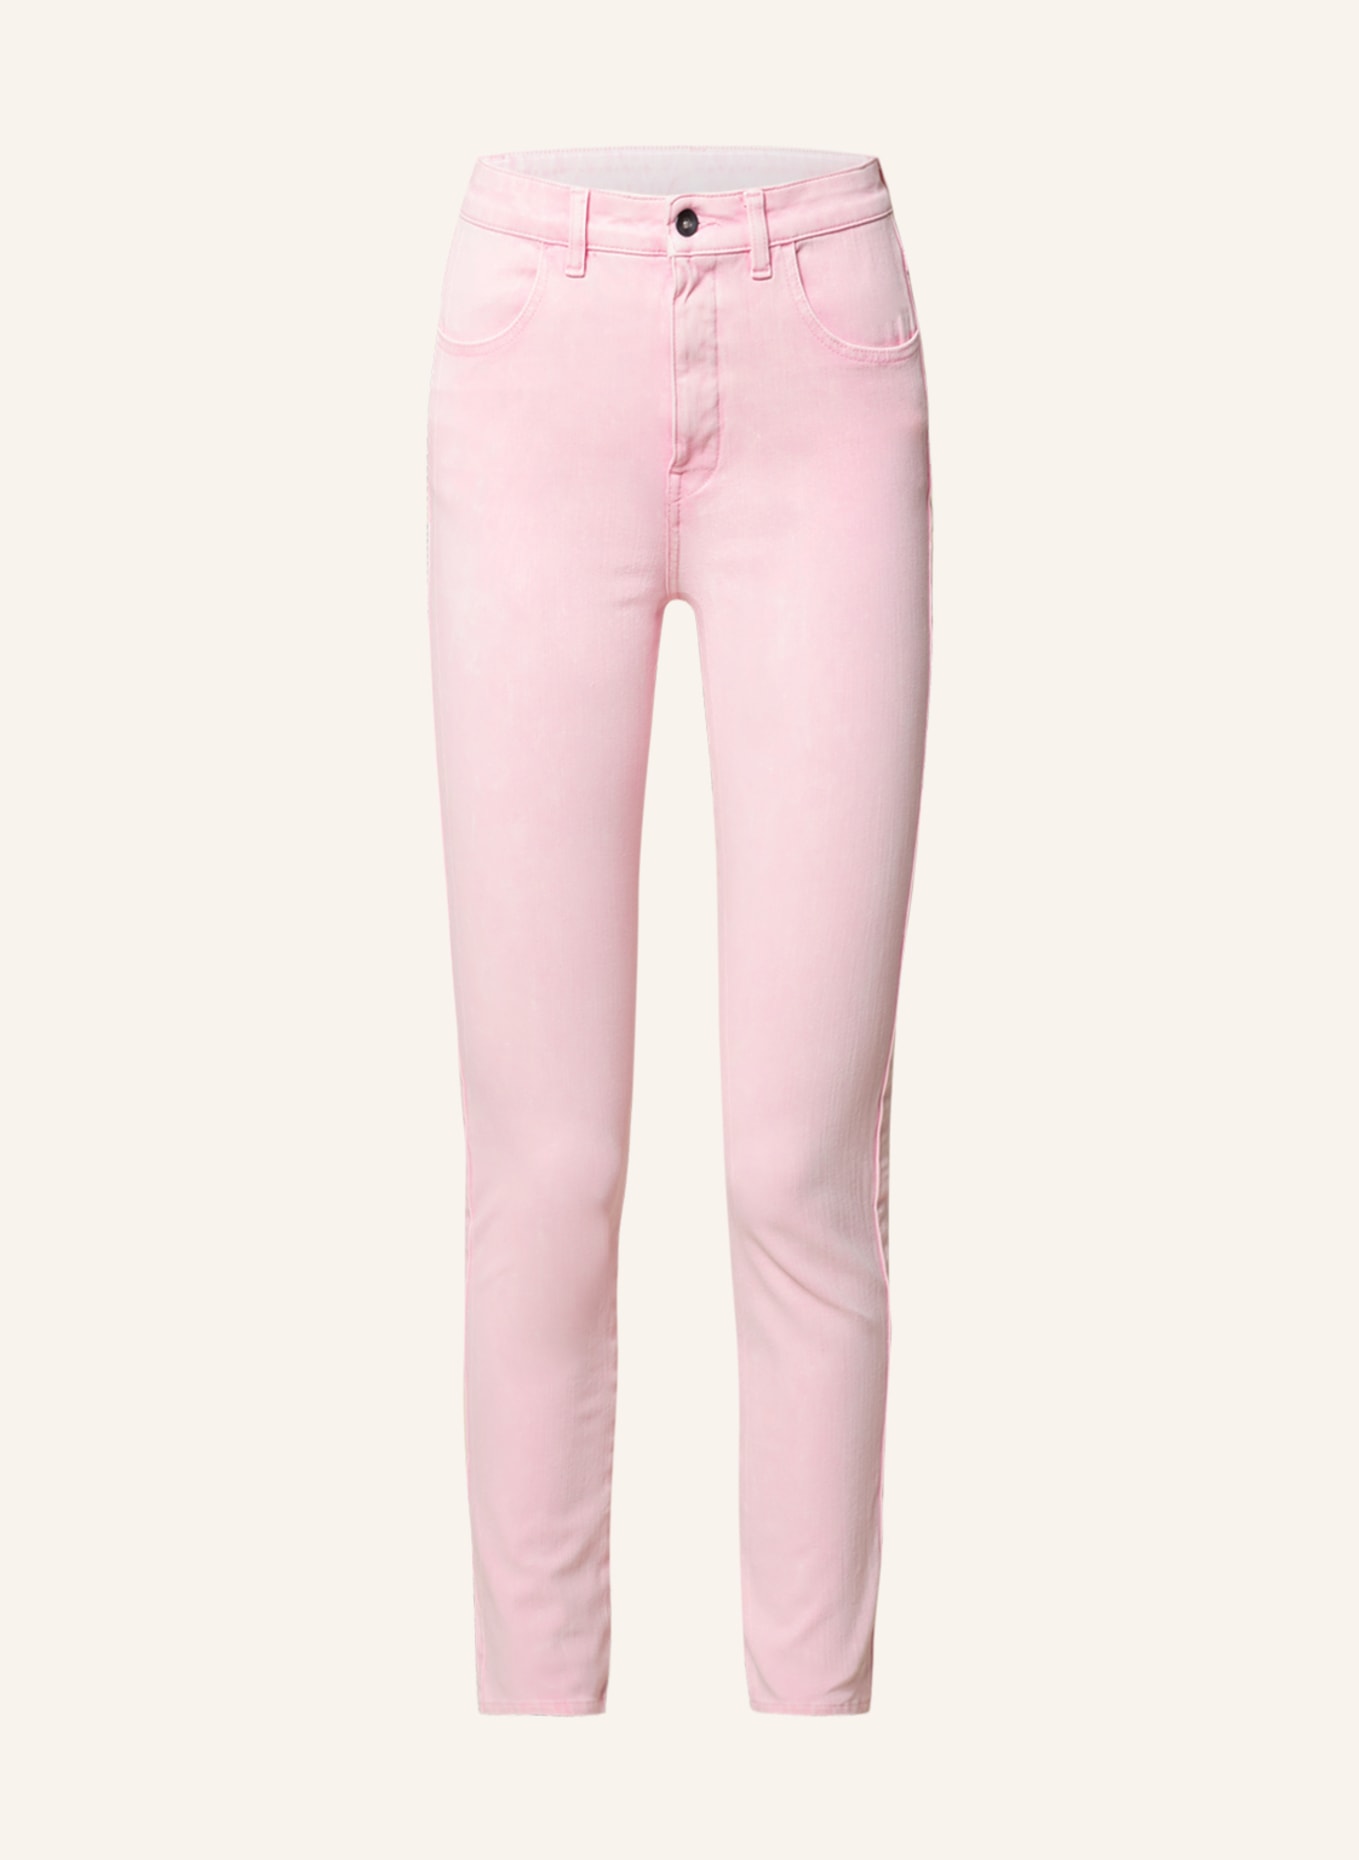 ITEM m6 Flared jeans with shaping effect, Color: 753 washed out pink (Image 1)